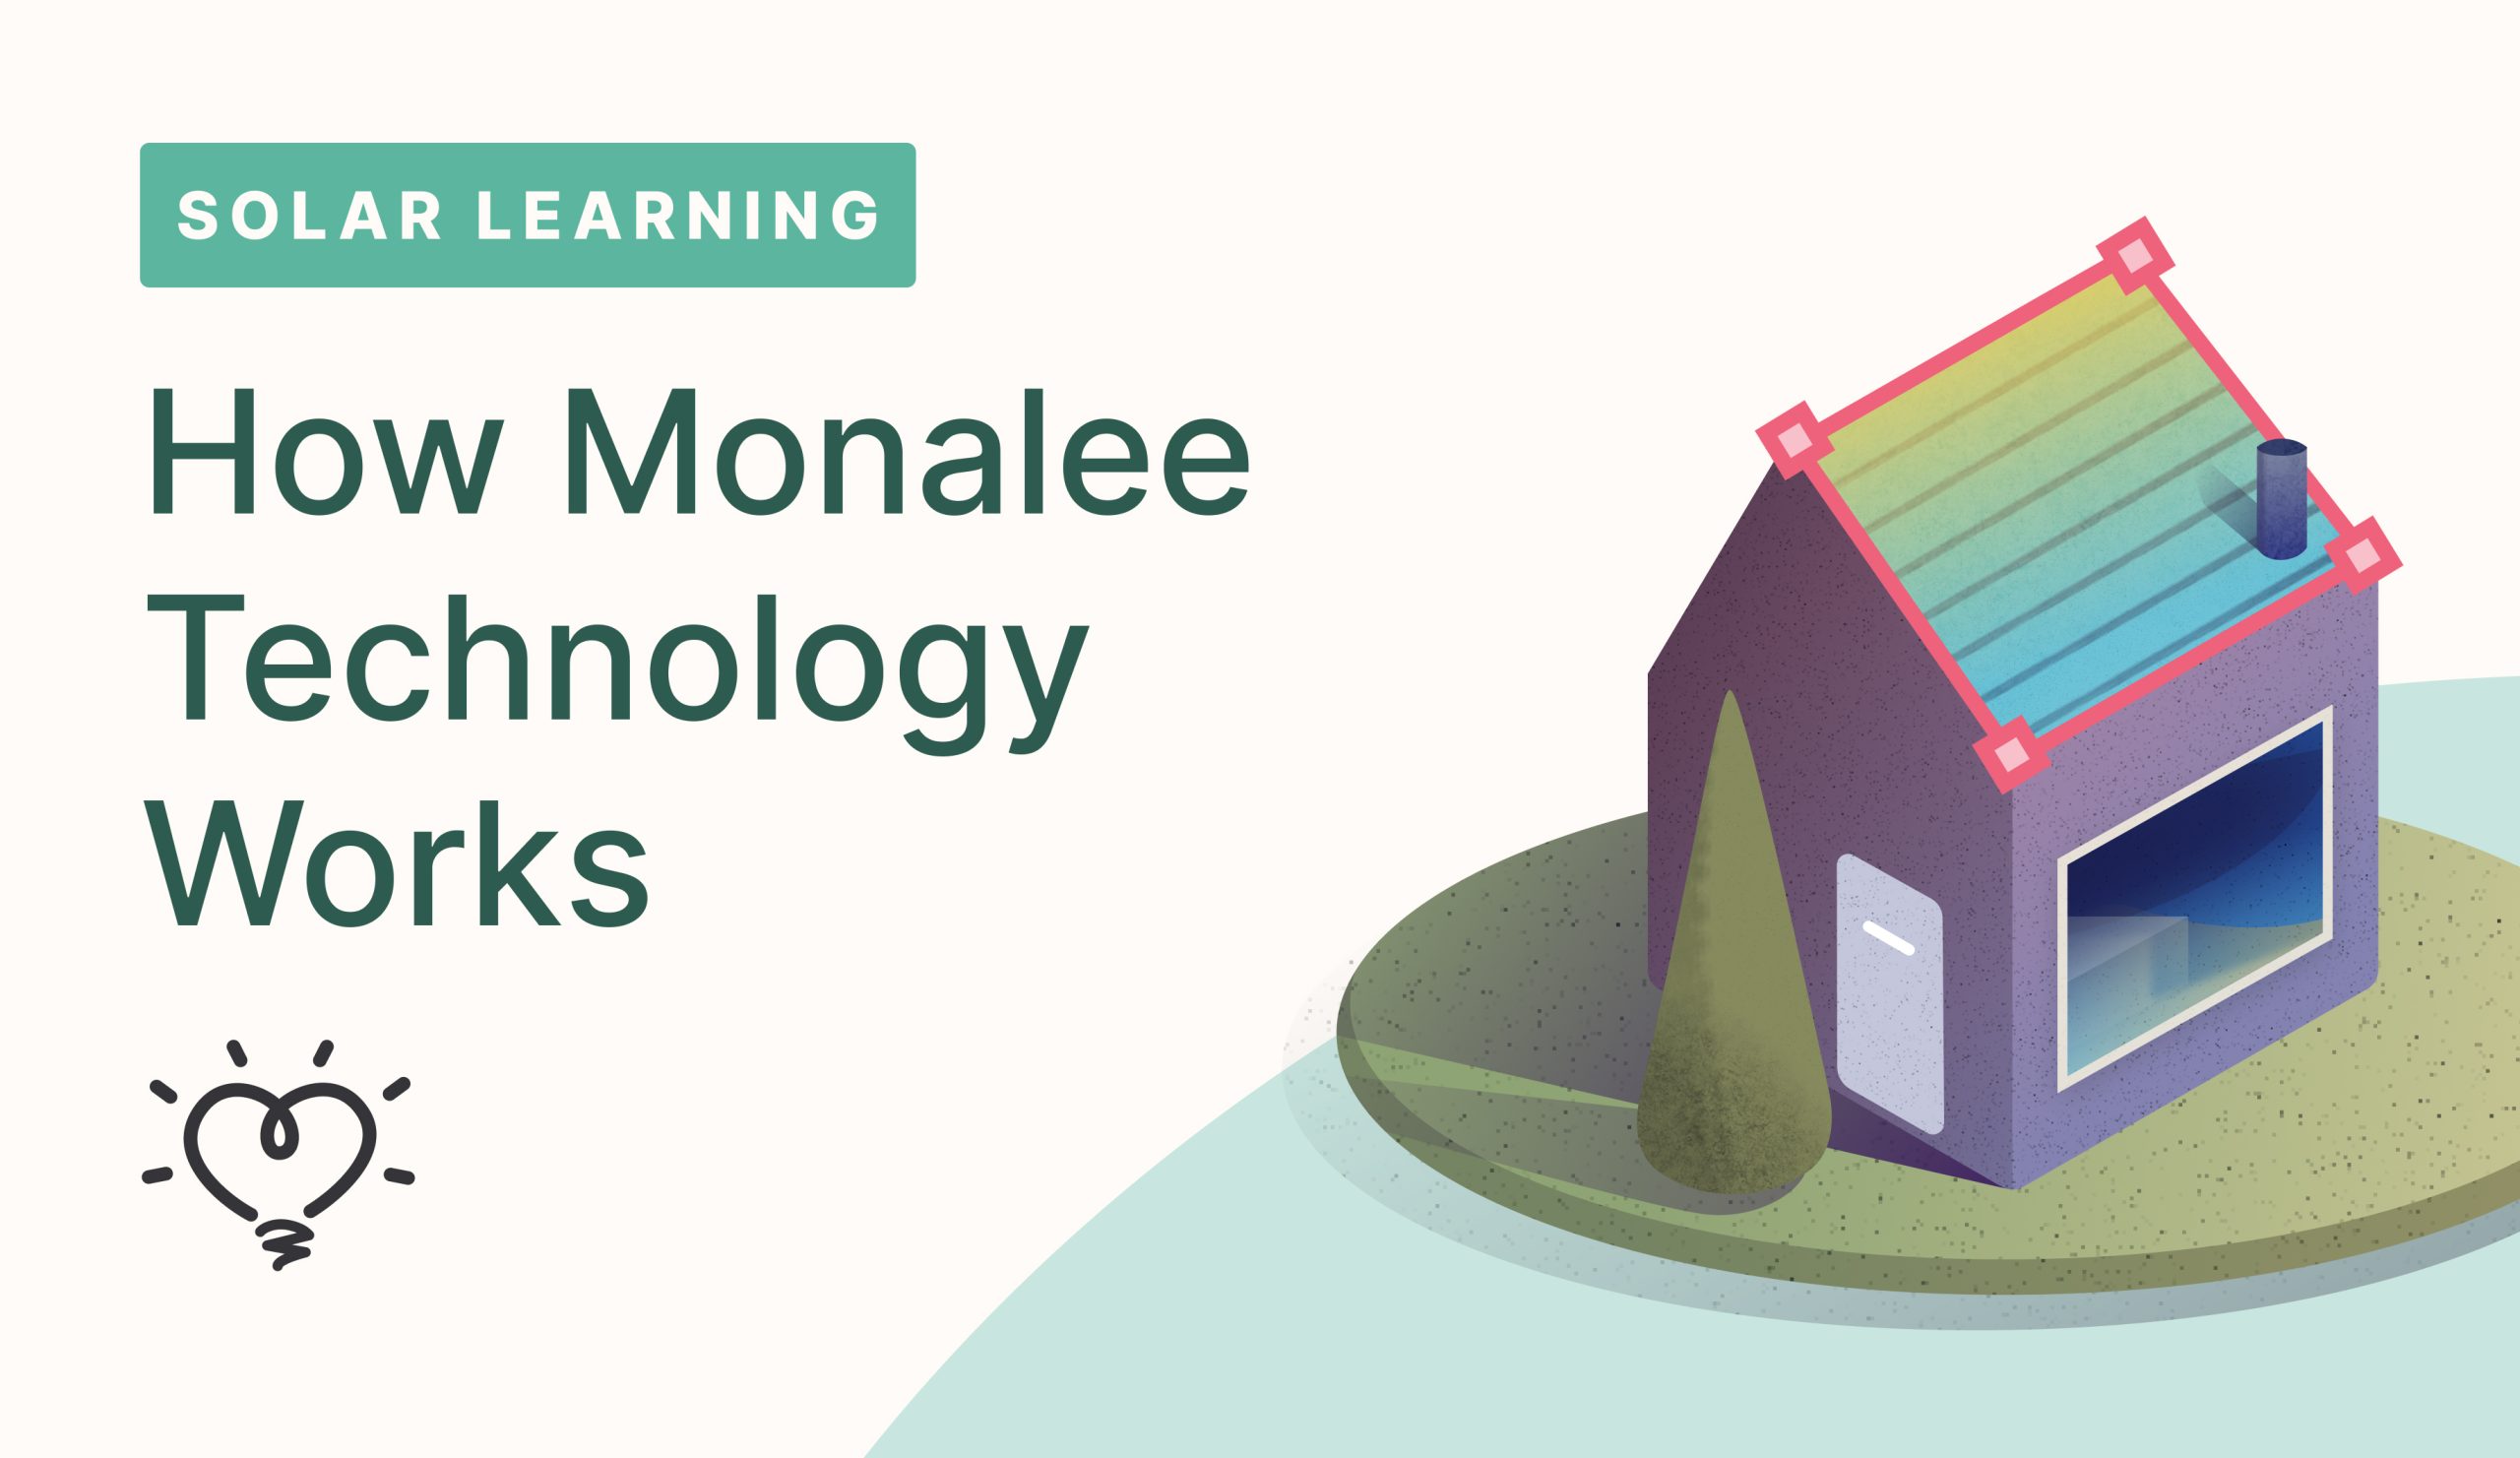 How Monalee Technology Works